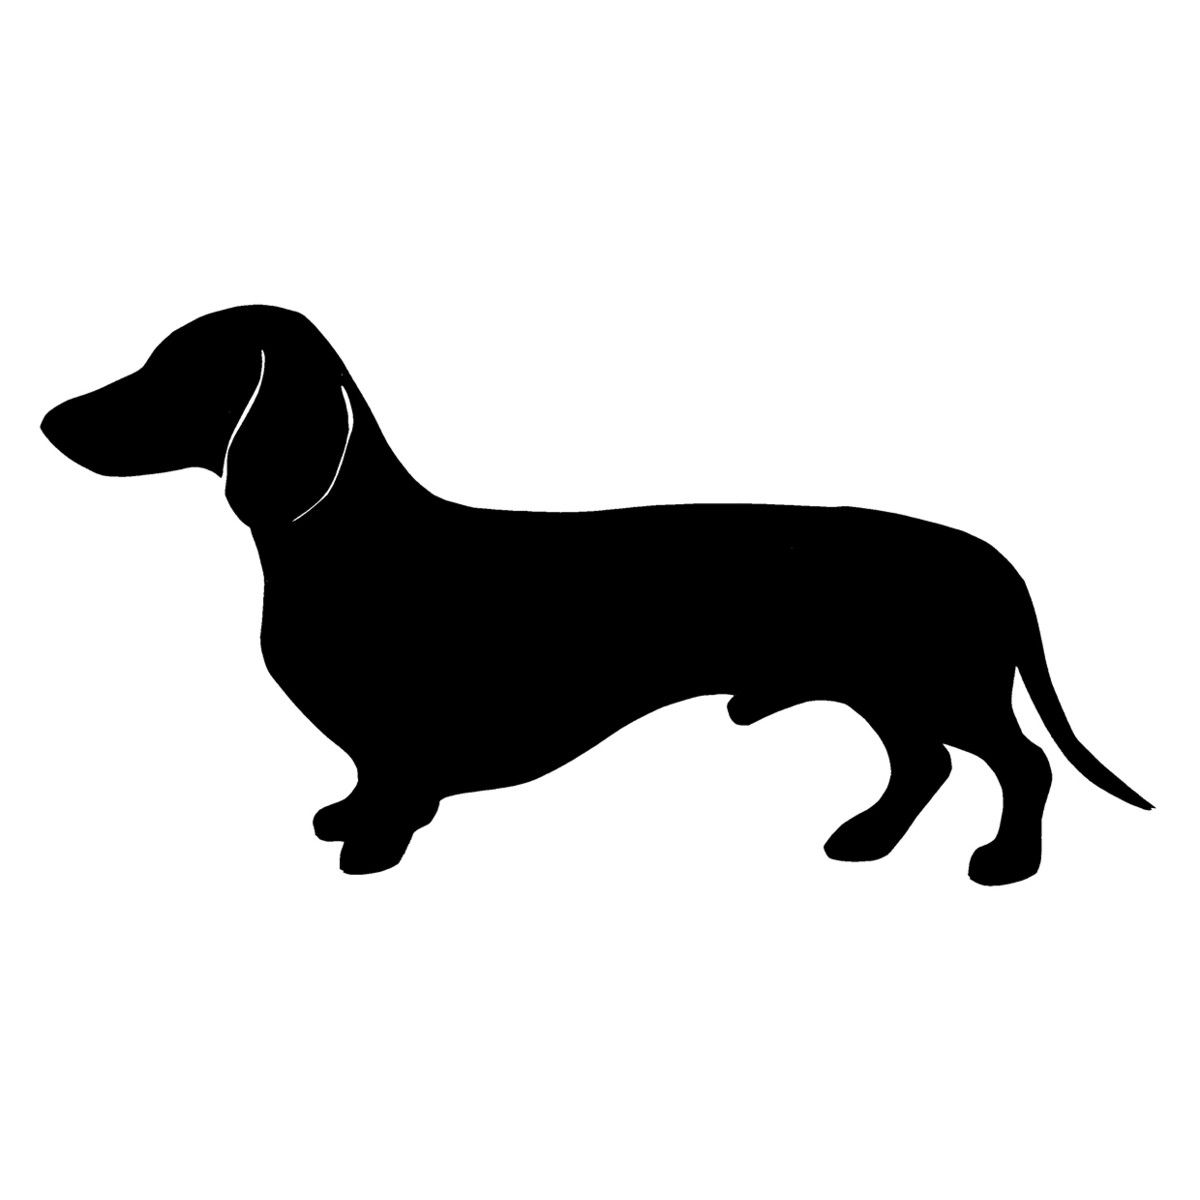 dachshund-silhouette-template-at-getdrawings-free-download